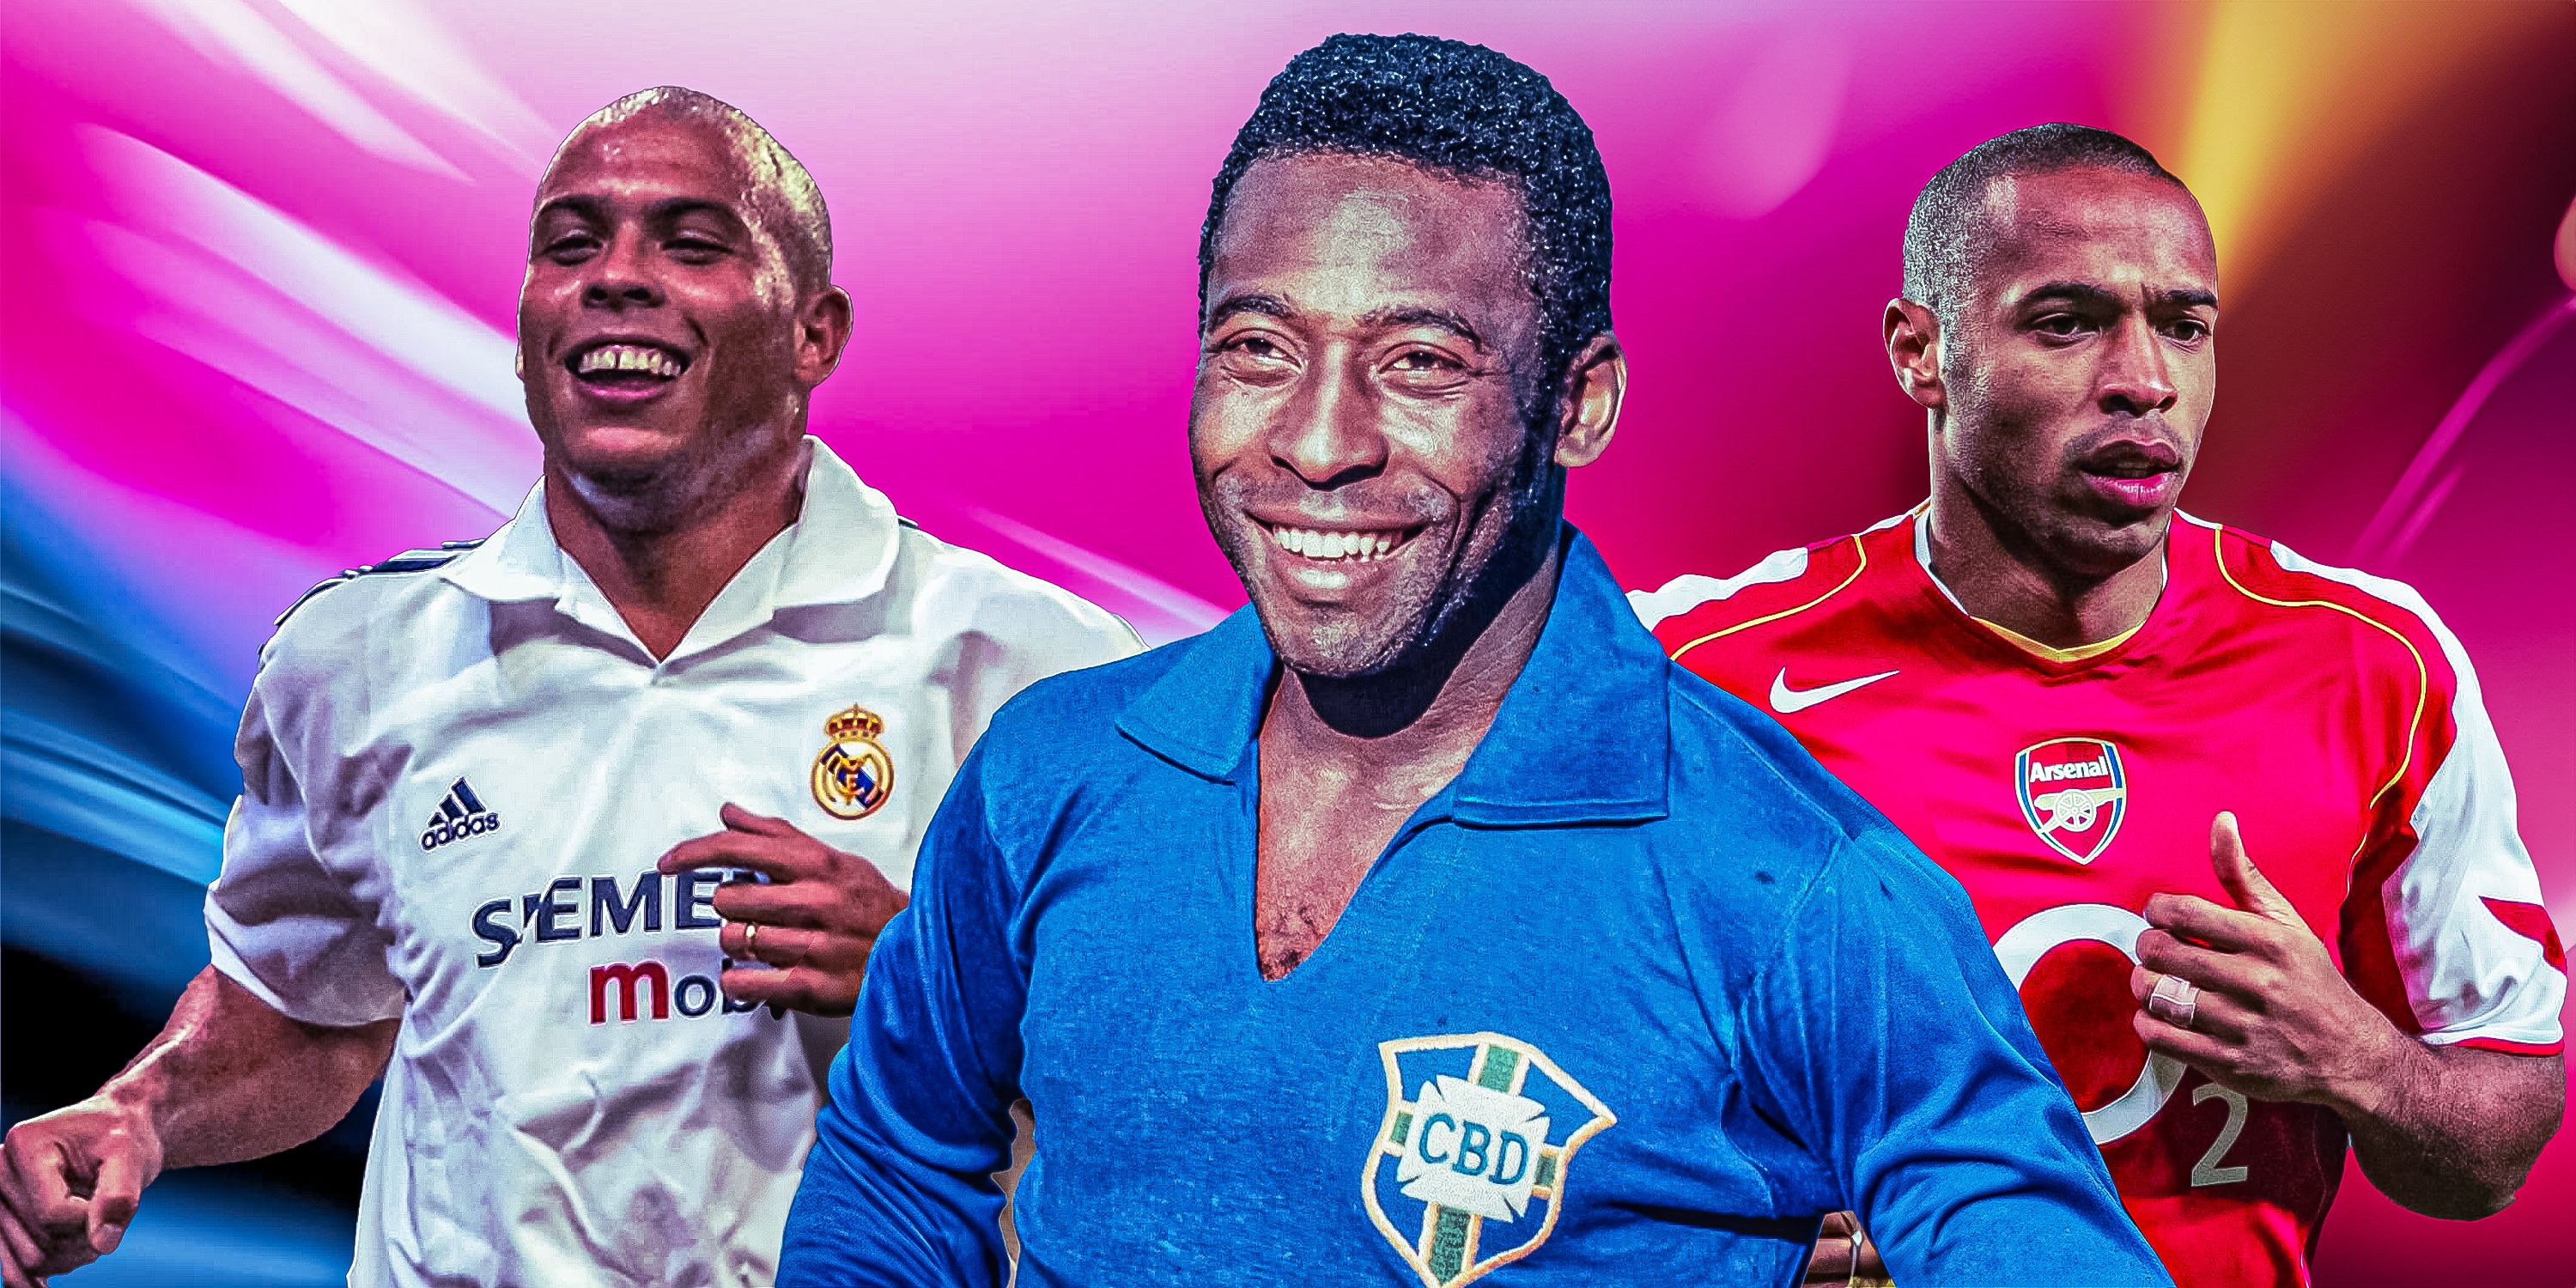 Greatest Strikers of all-time in football featuring Ronaldo, Pele and Thierry Henry